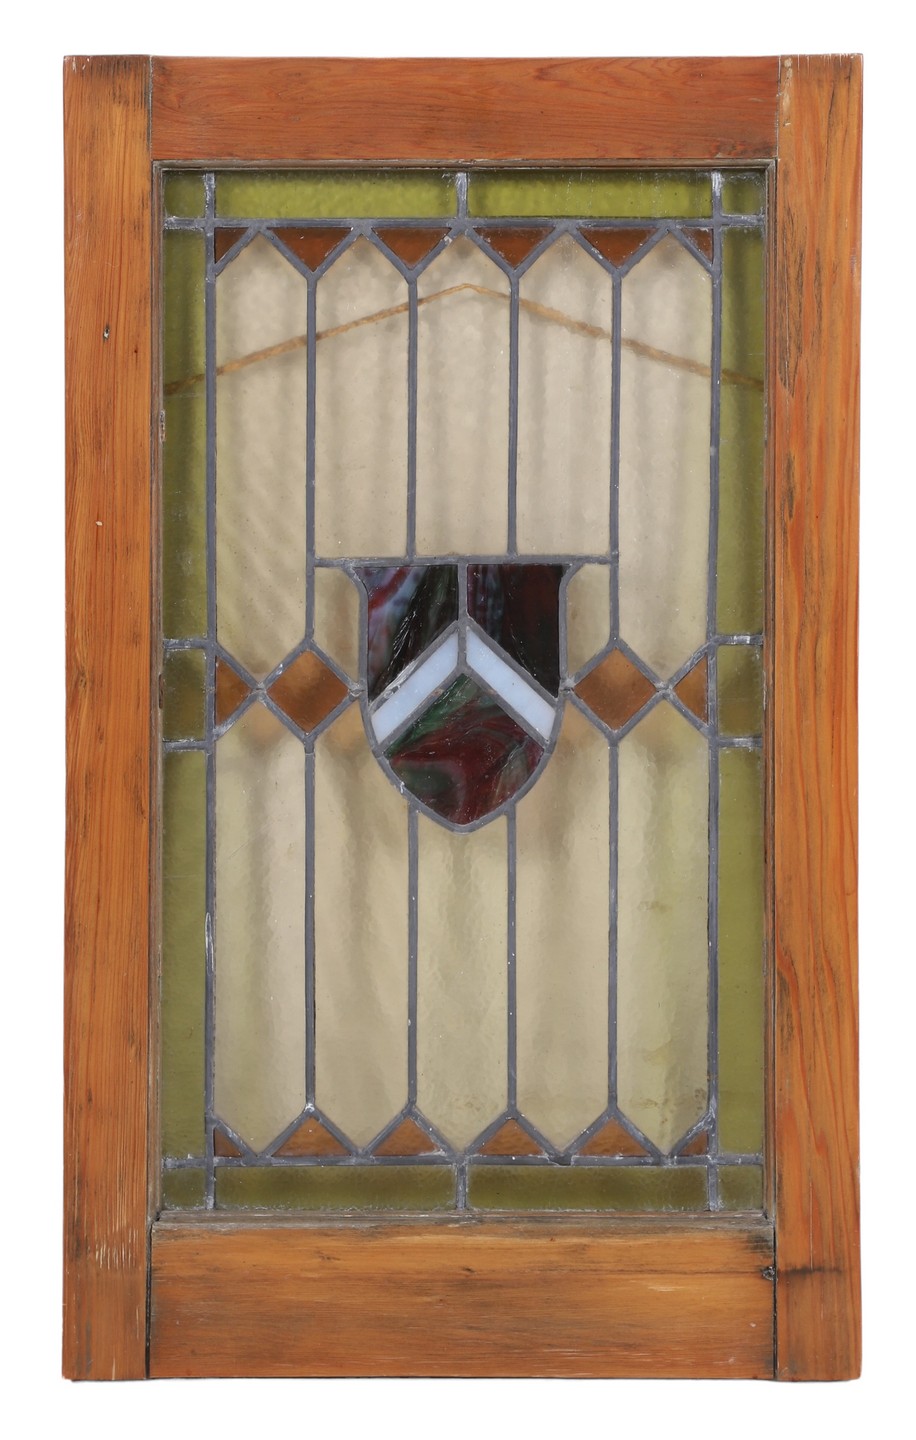 Stained glass window, wood frame,